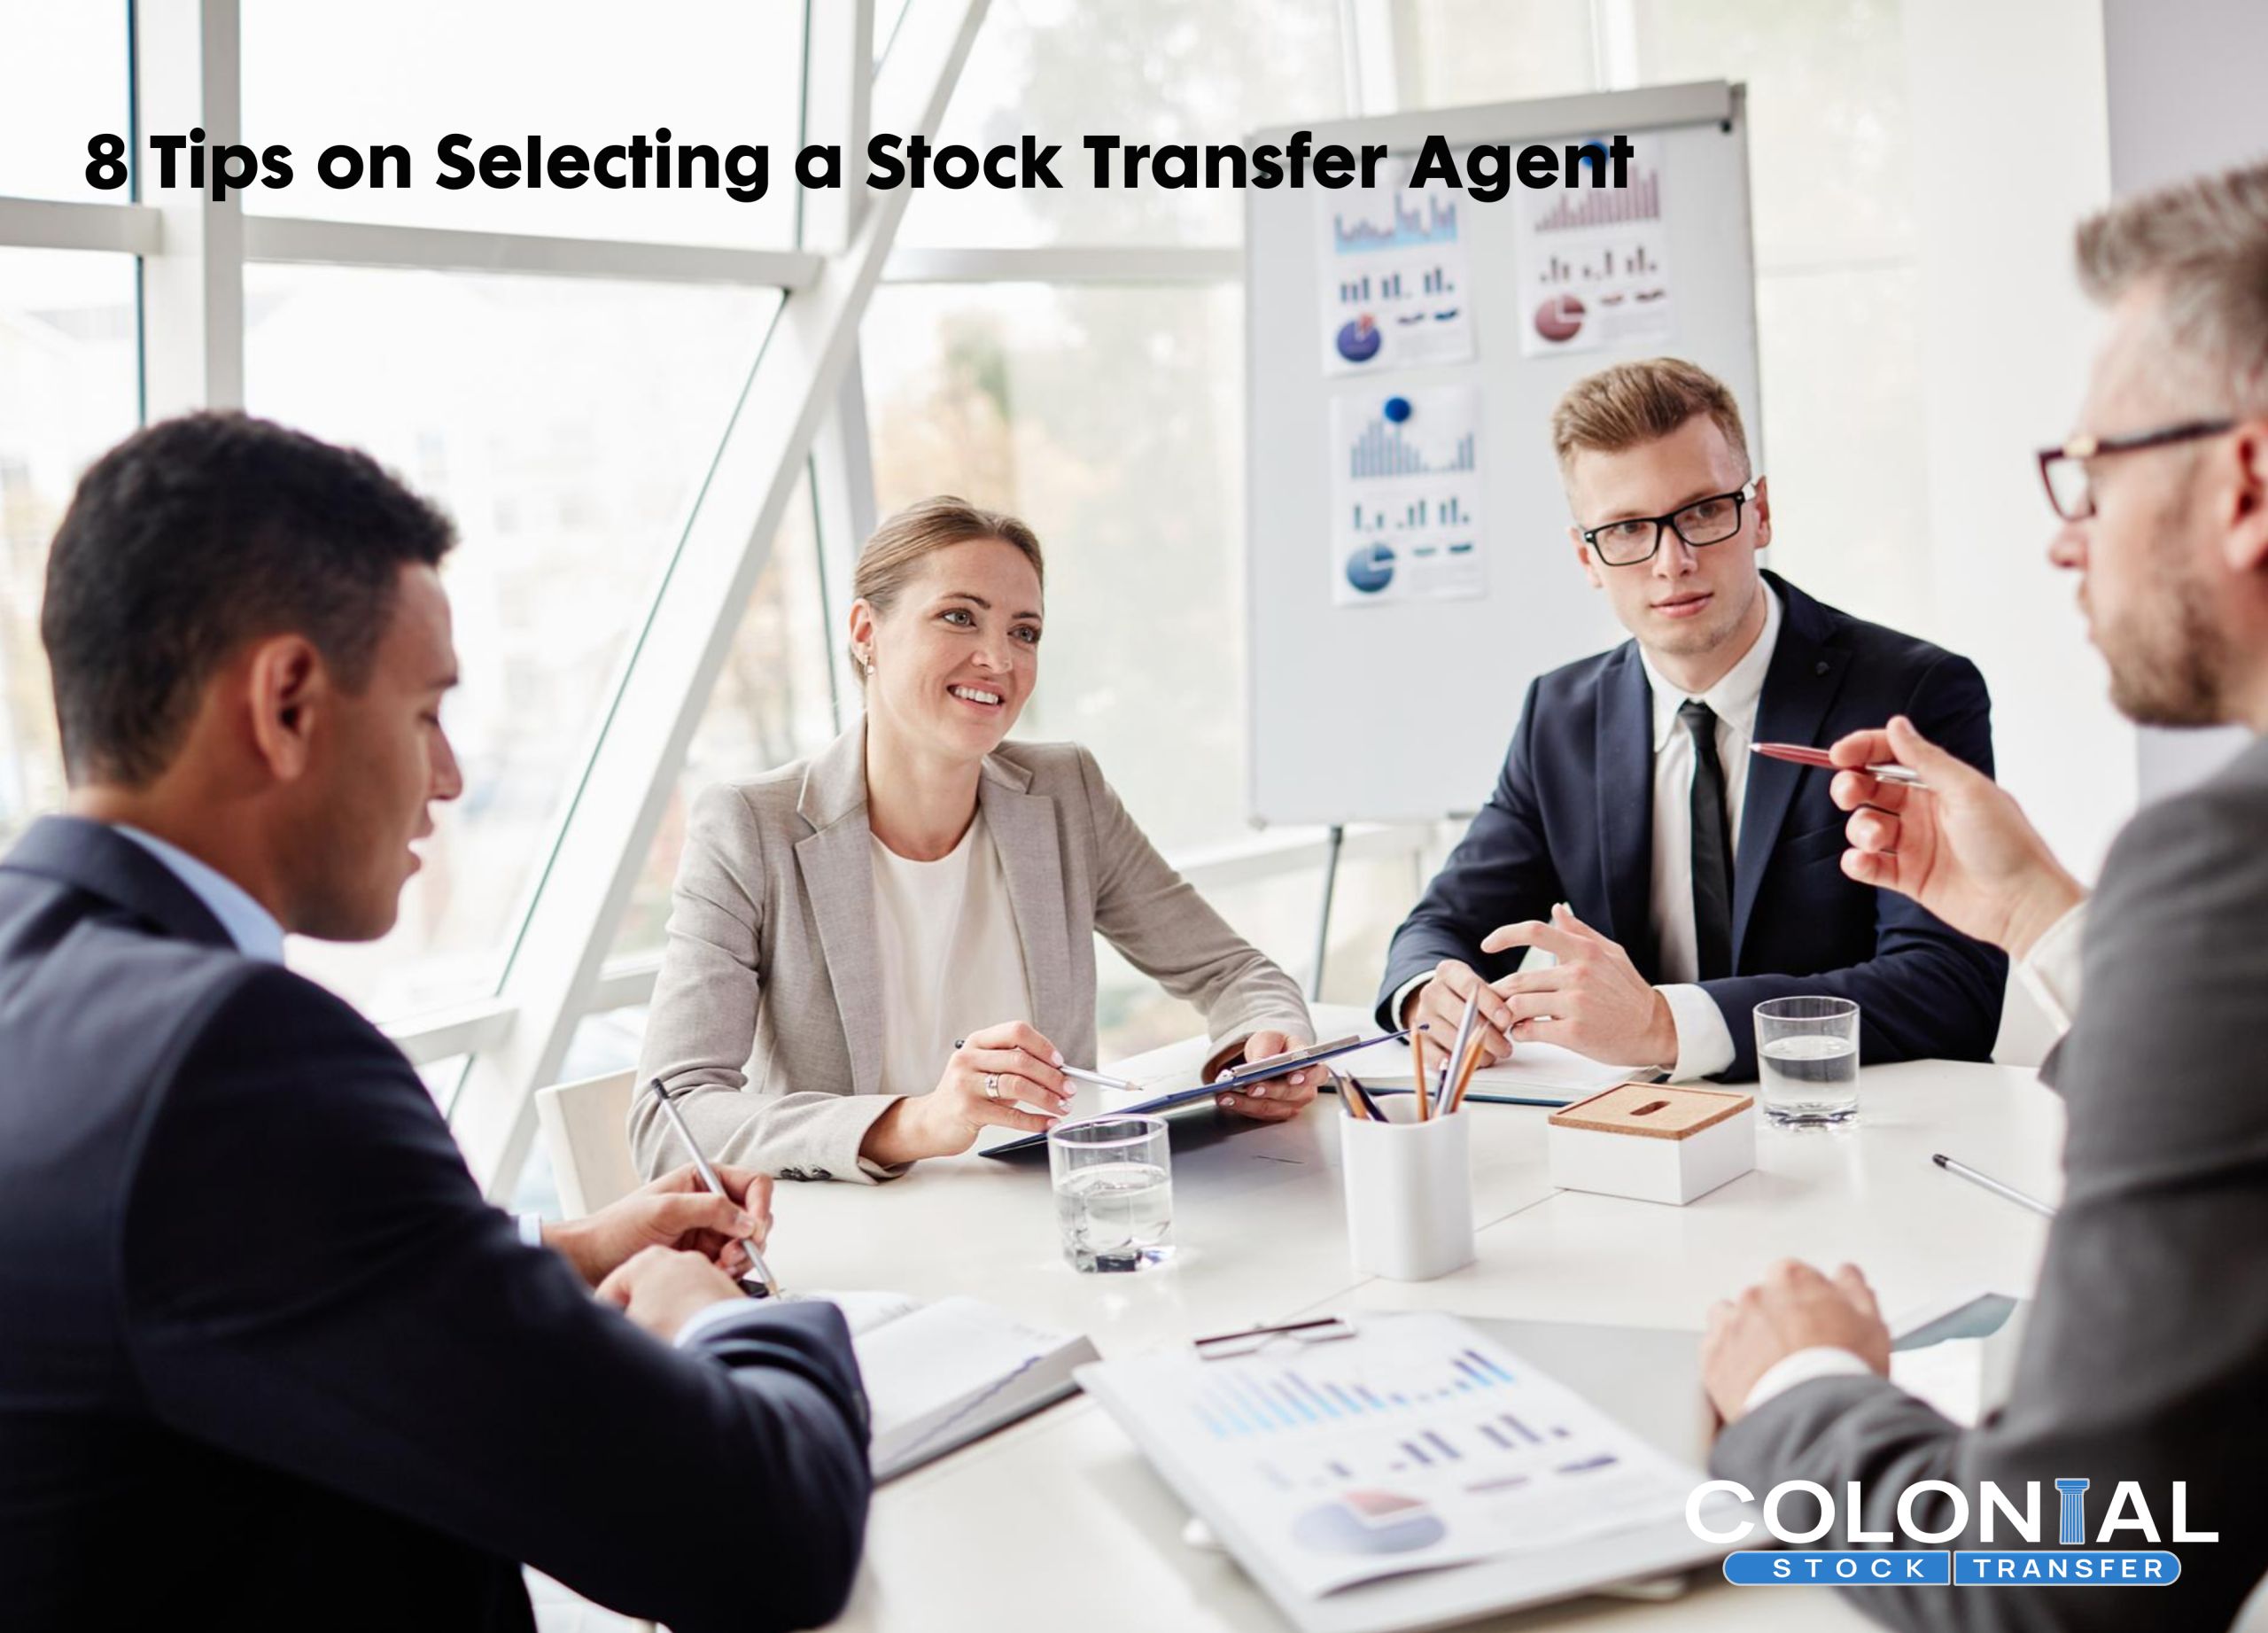 8 Tips on Selecting a Stock Transfer Agent